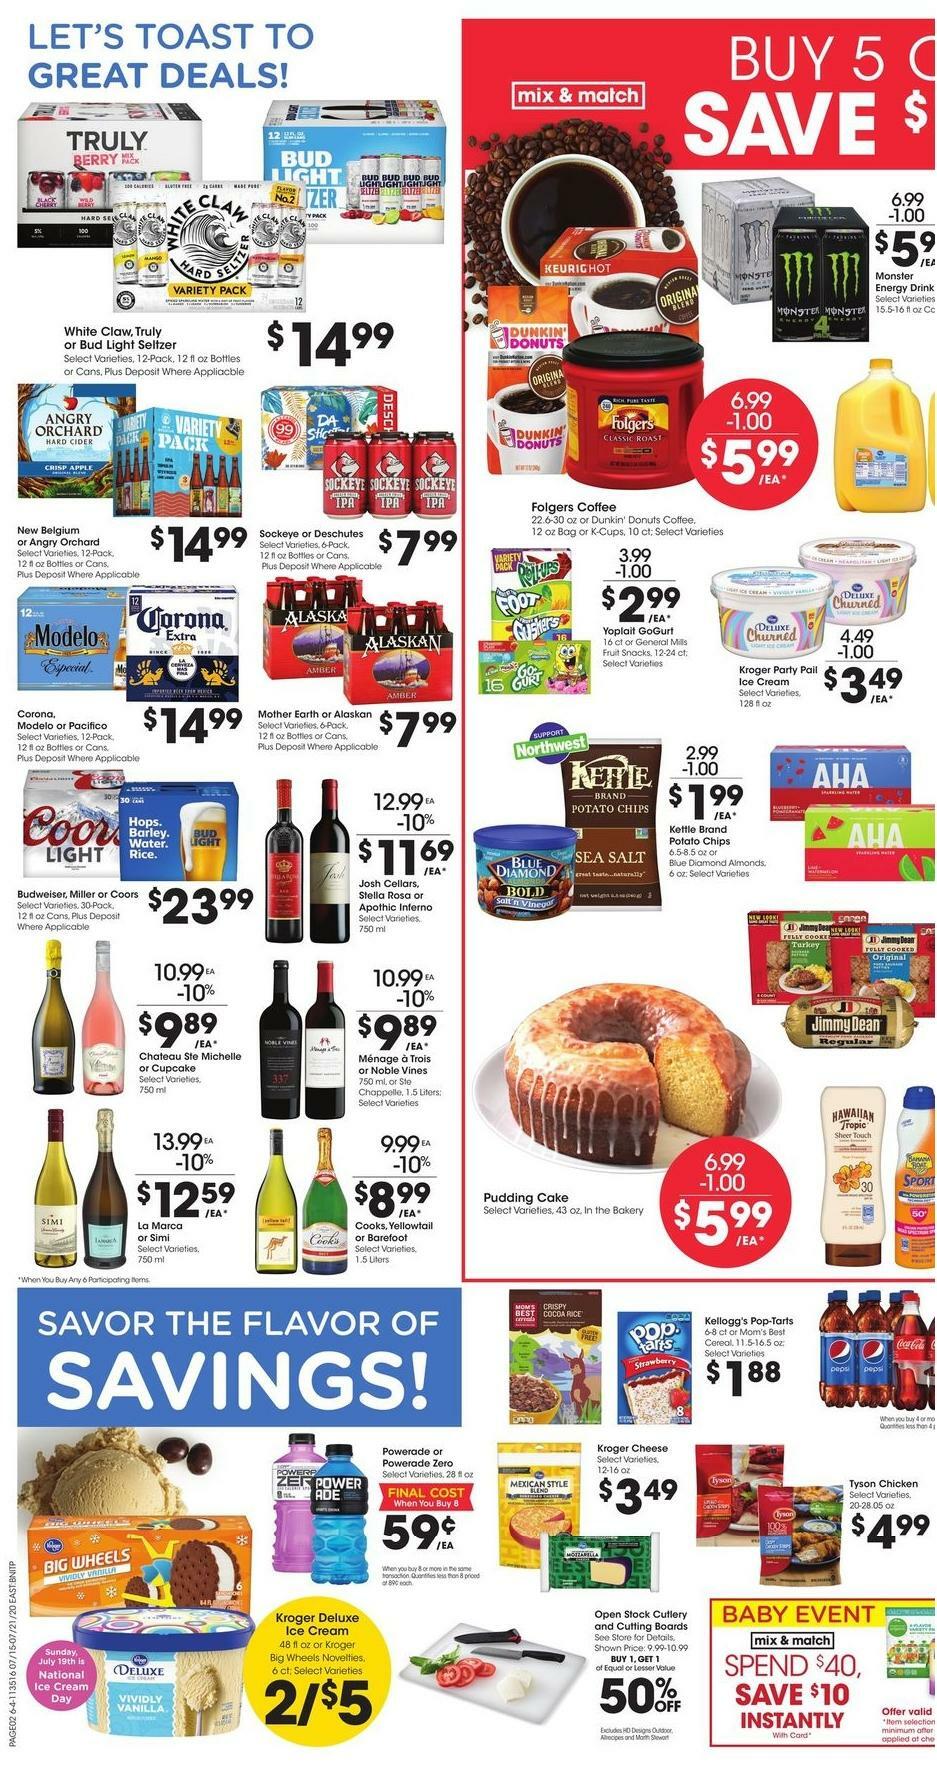 Fred Meyer Weekly Ad from July 15